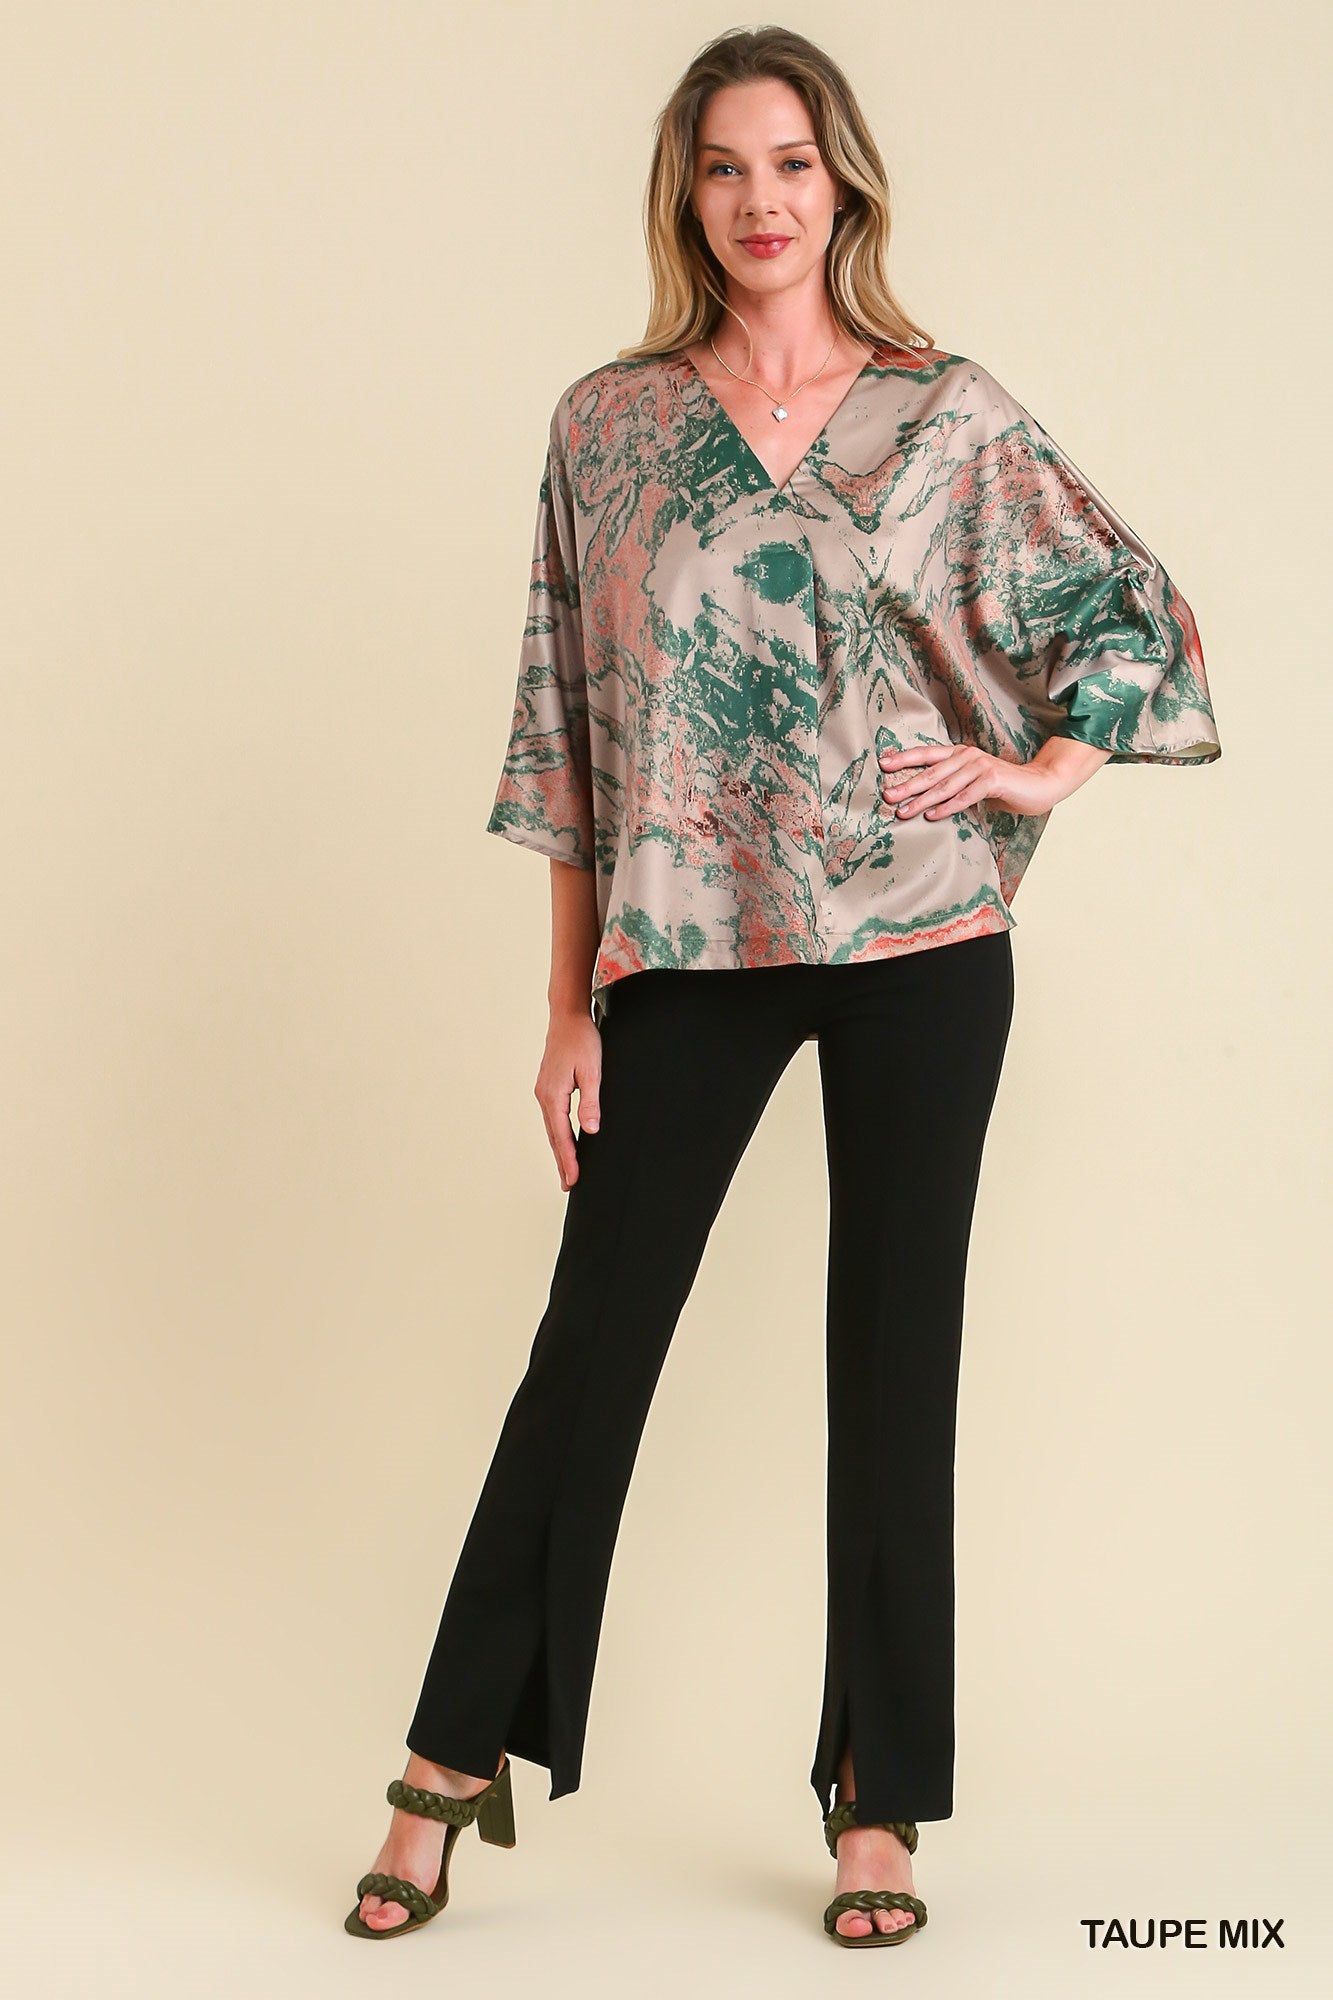 Umgee Mix Marble Print Batwing High Low Hem Top - Roulhac Fashion Boutique